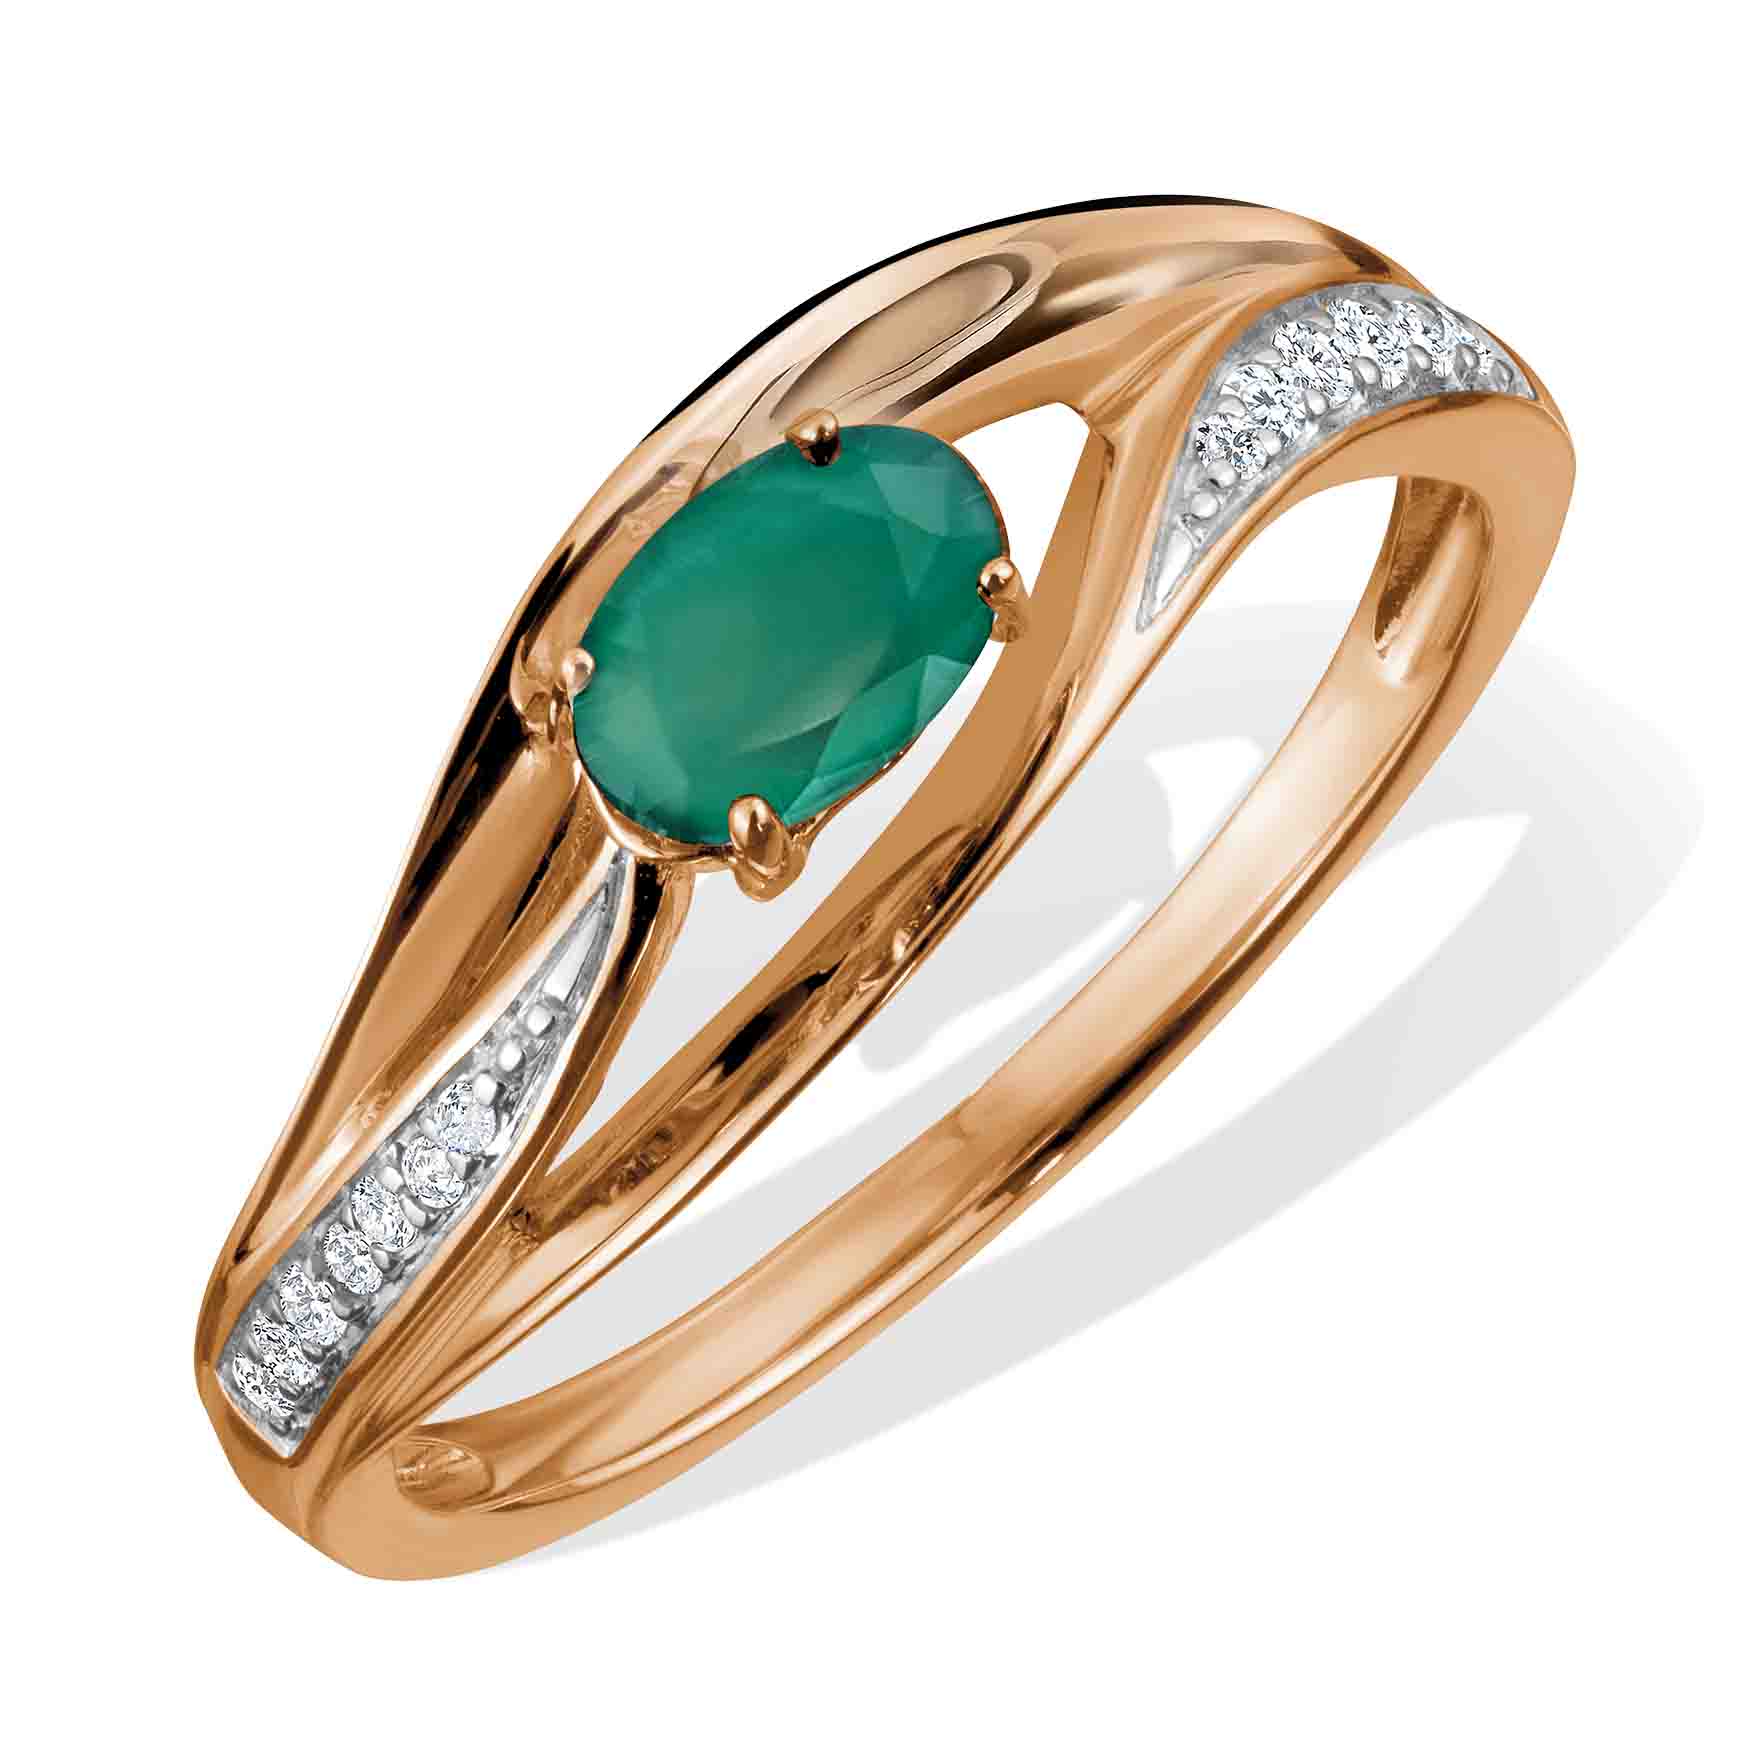 Night Restate make worse Diamond and cloudy emerald ring of 14K rose gold | Golden Flamingo